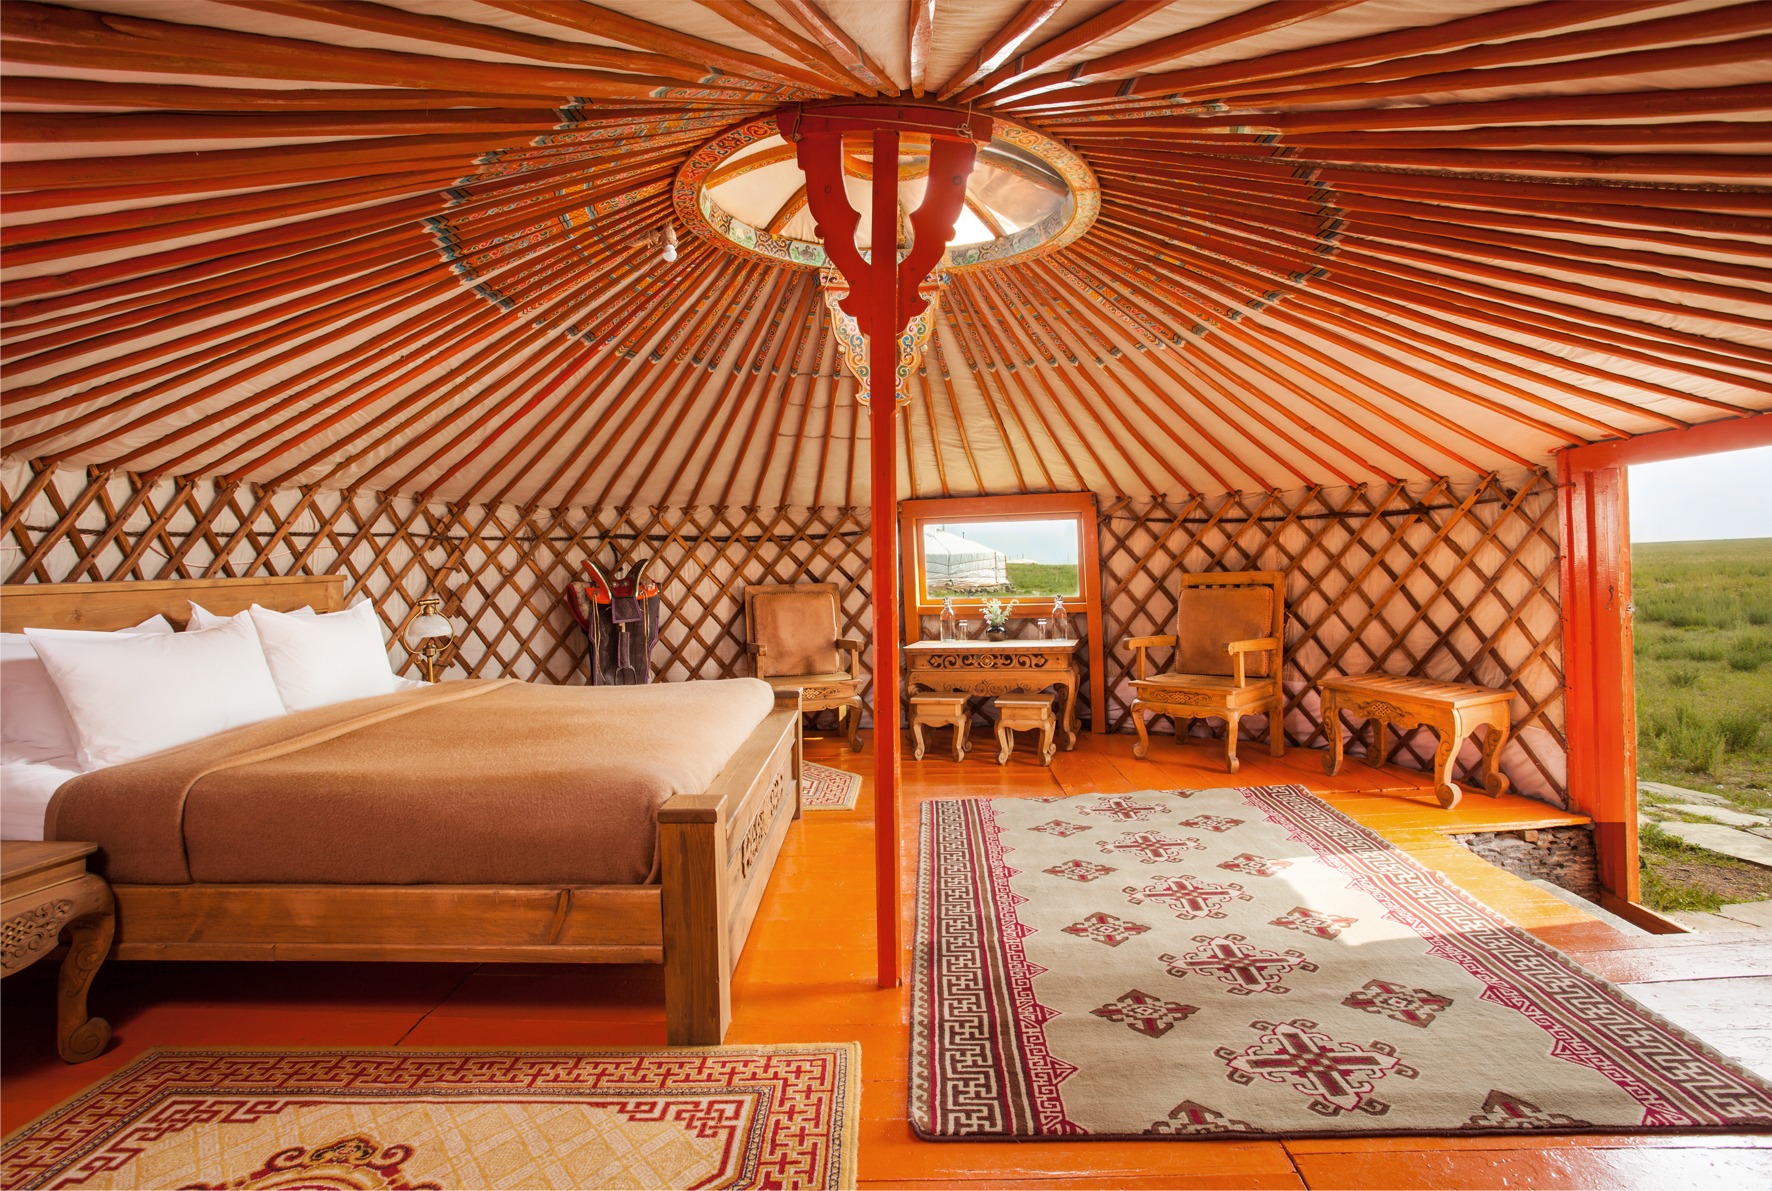 The red interior of a yurt, a type of tent, in Three Camel Lodge. The lodge rigorously practices sustainable tourism